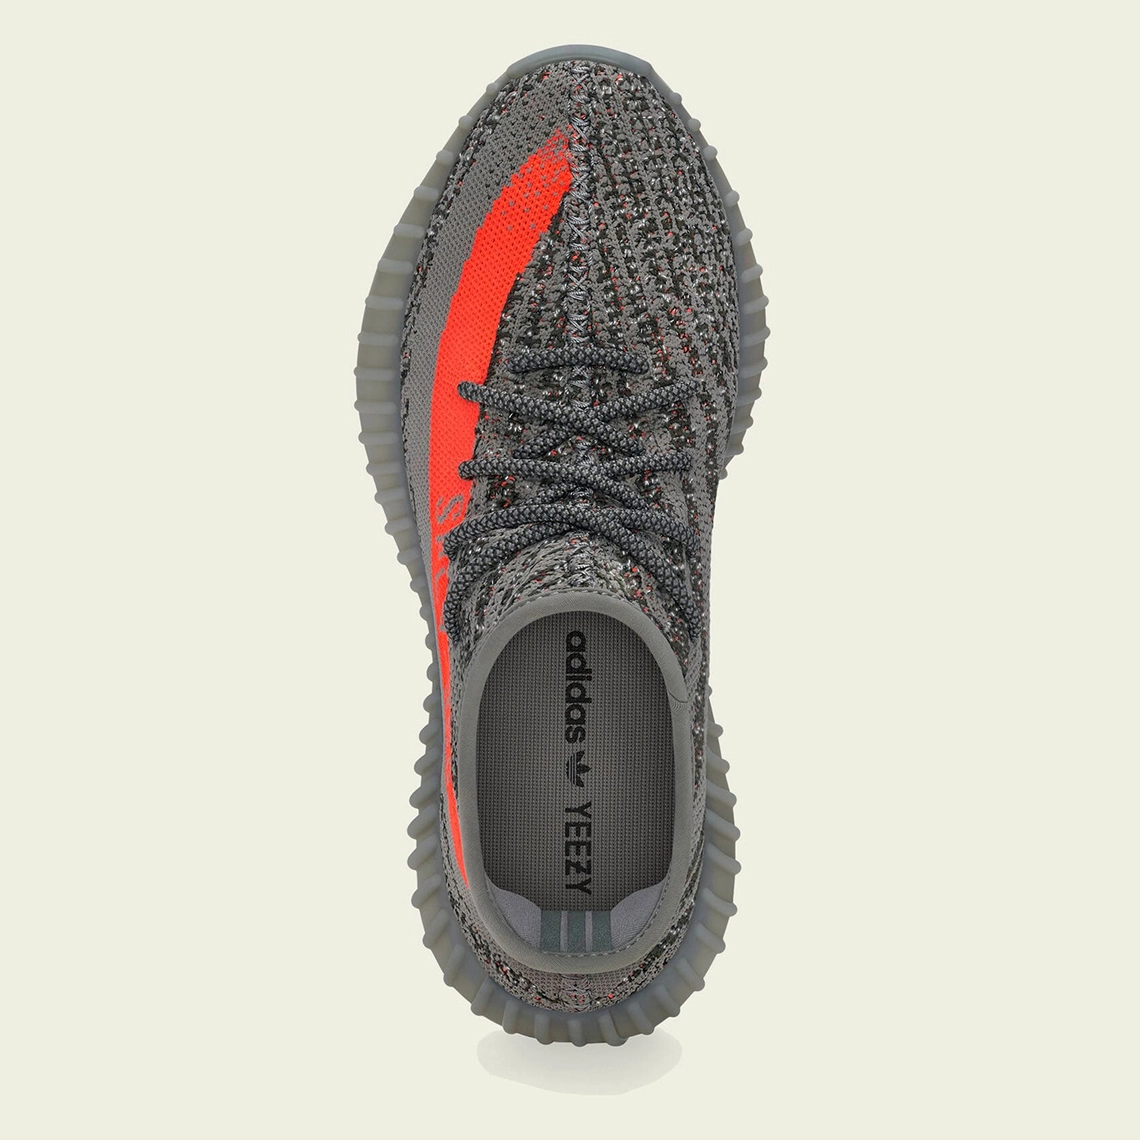 adidas-yeezy-boost-350-v2-beluga-reflective-official-images-GW1229-3